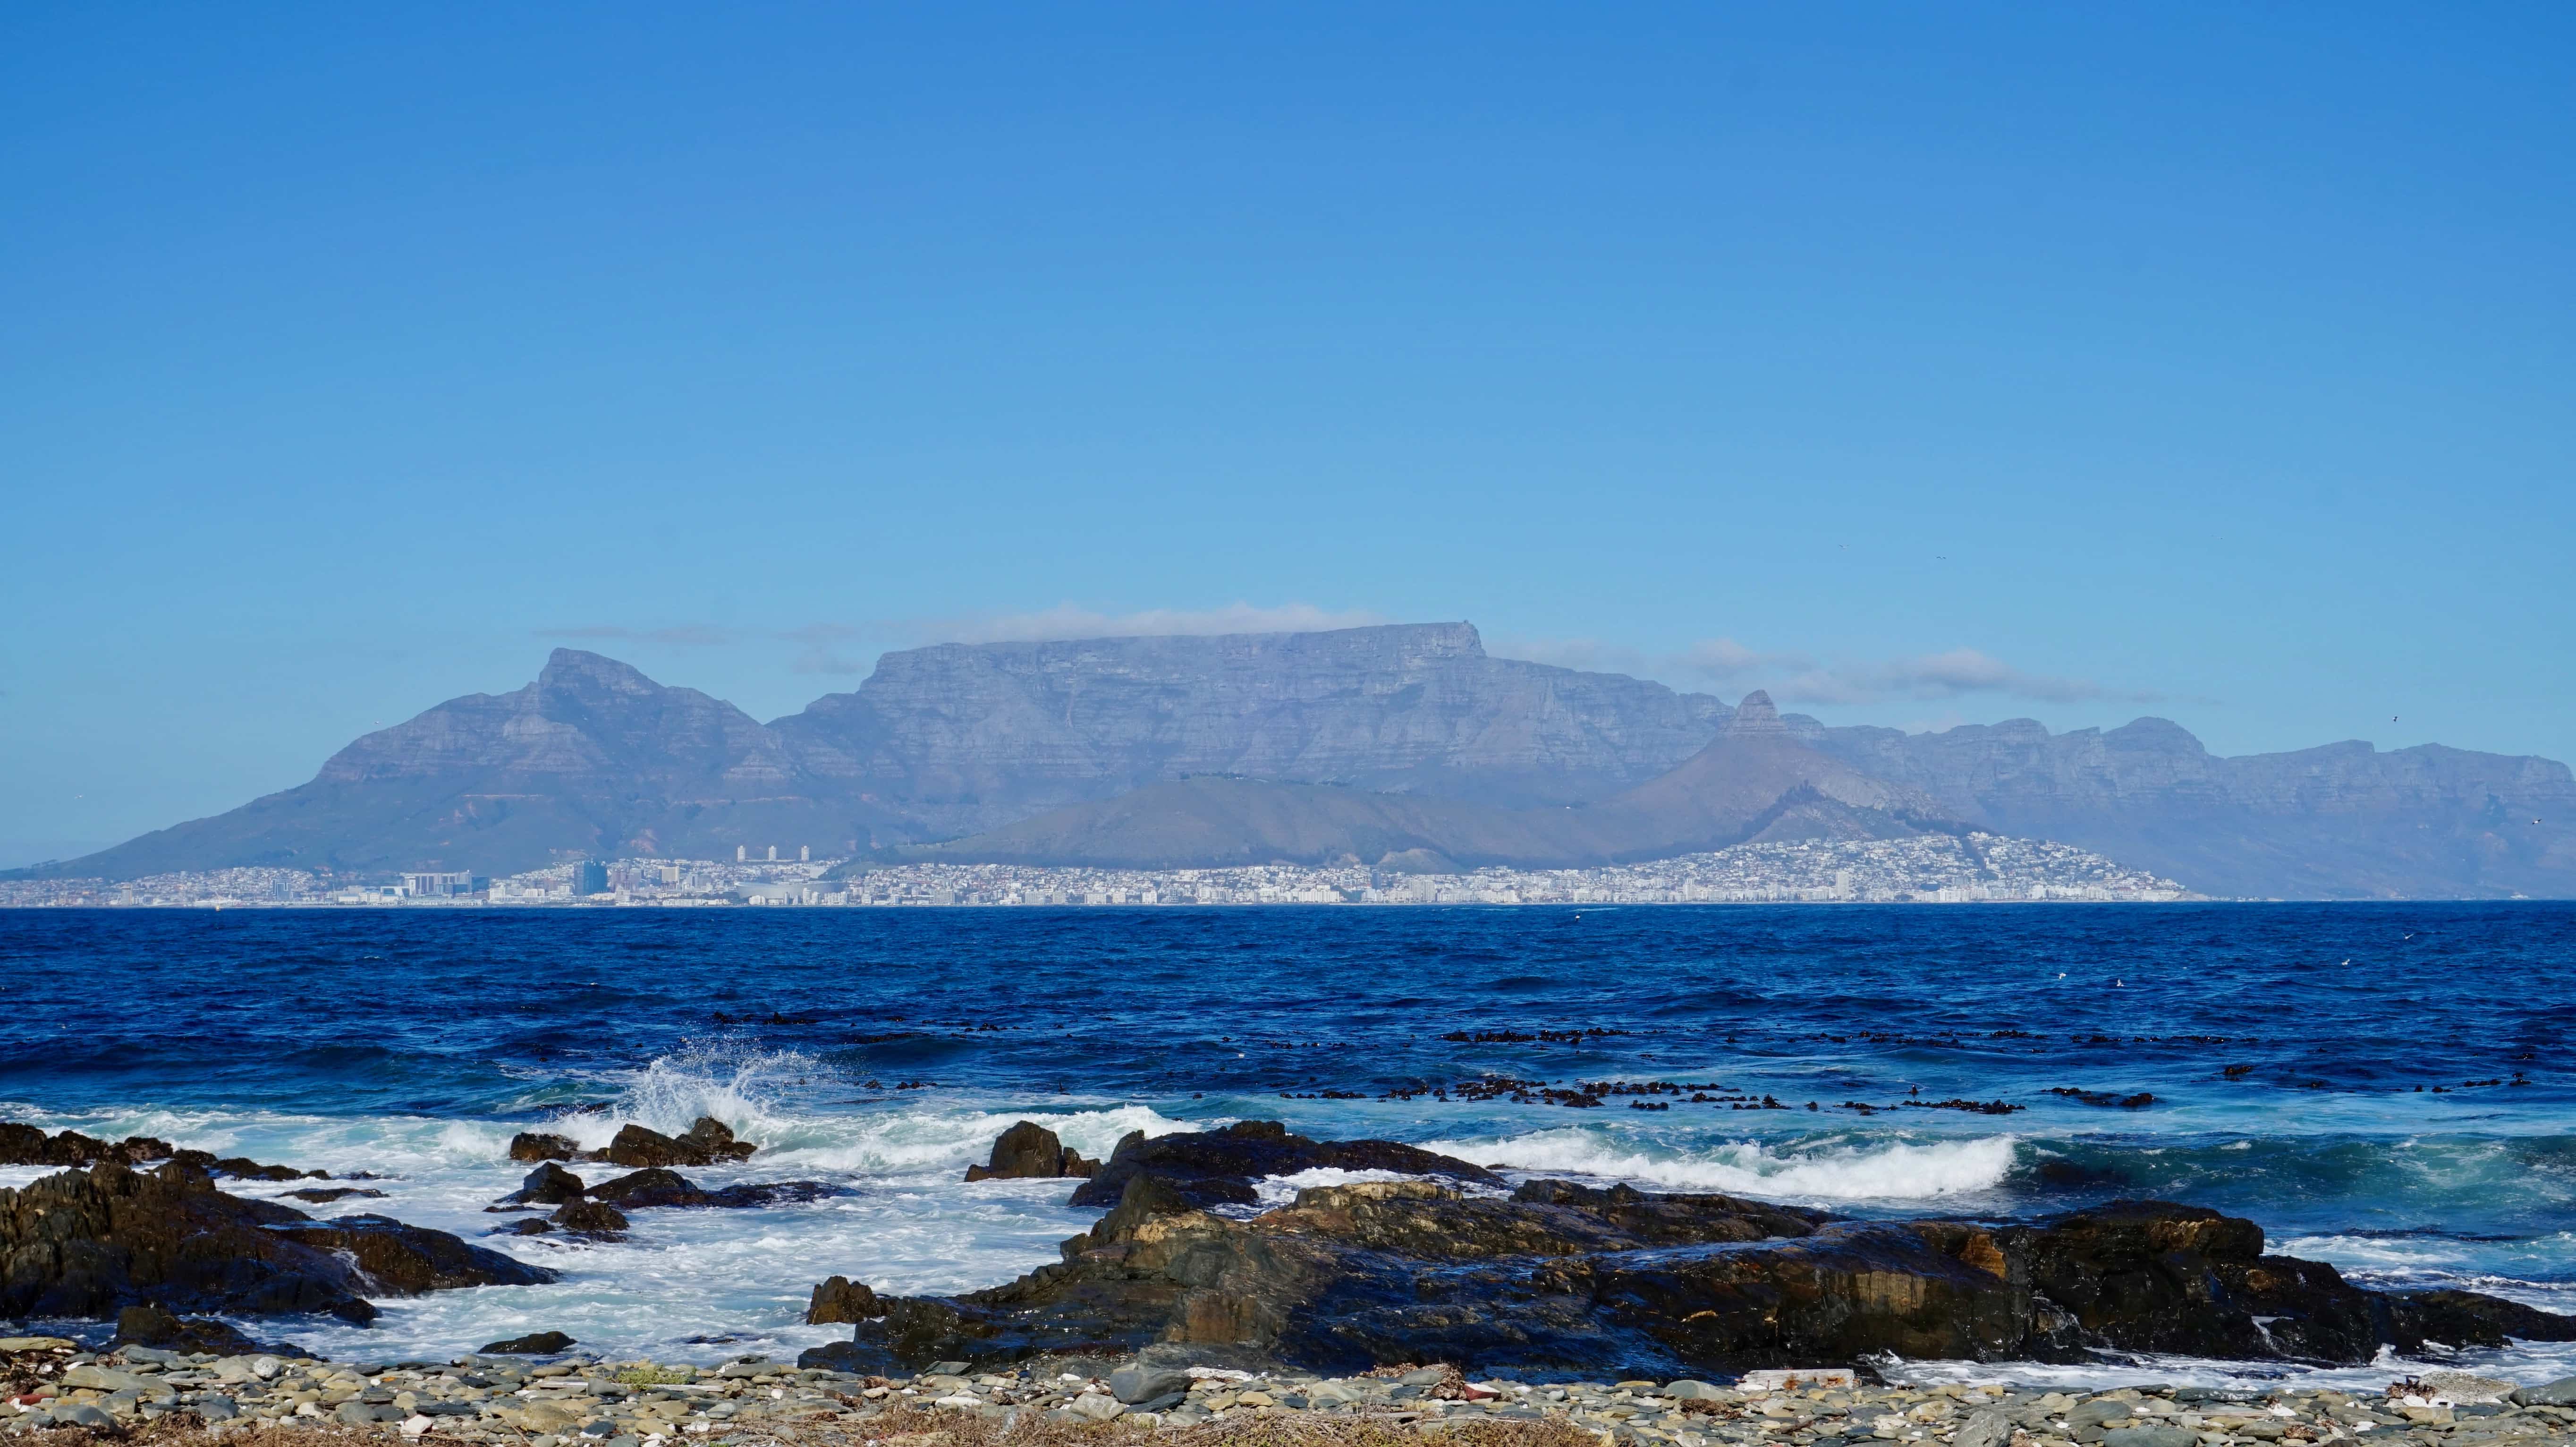 View of Cape Town from Robben Island